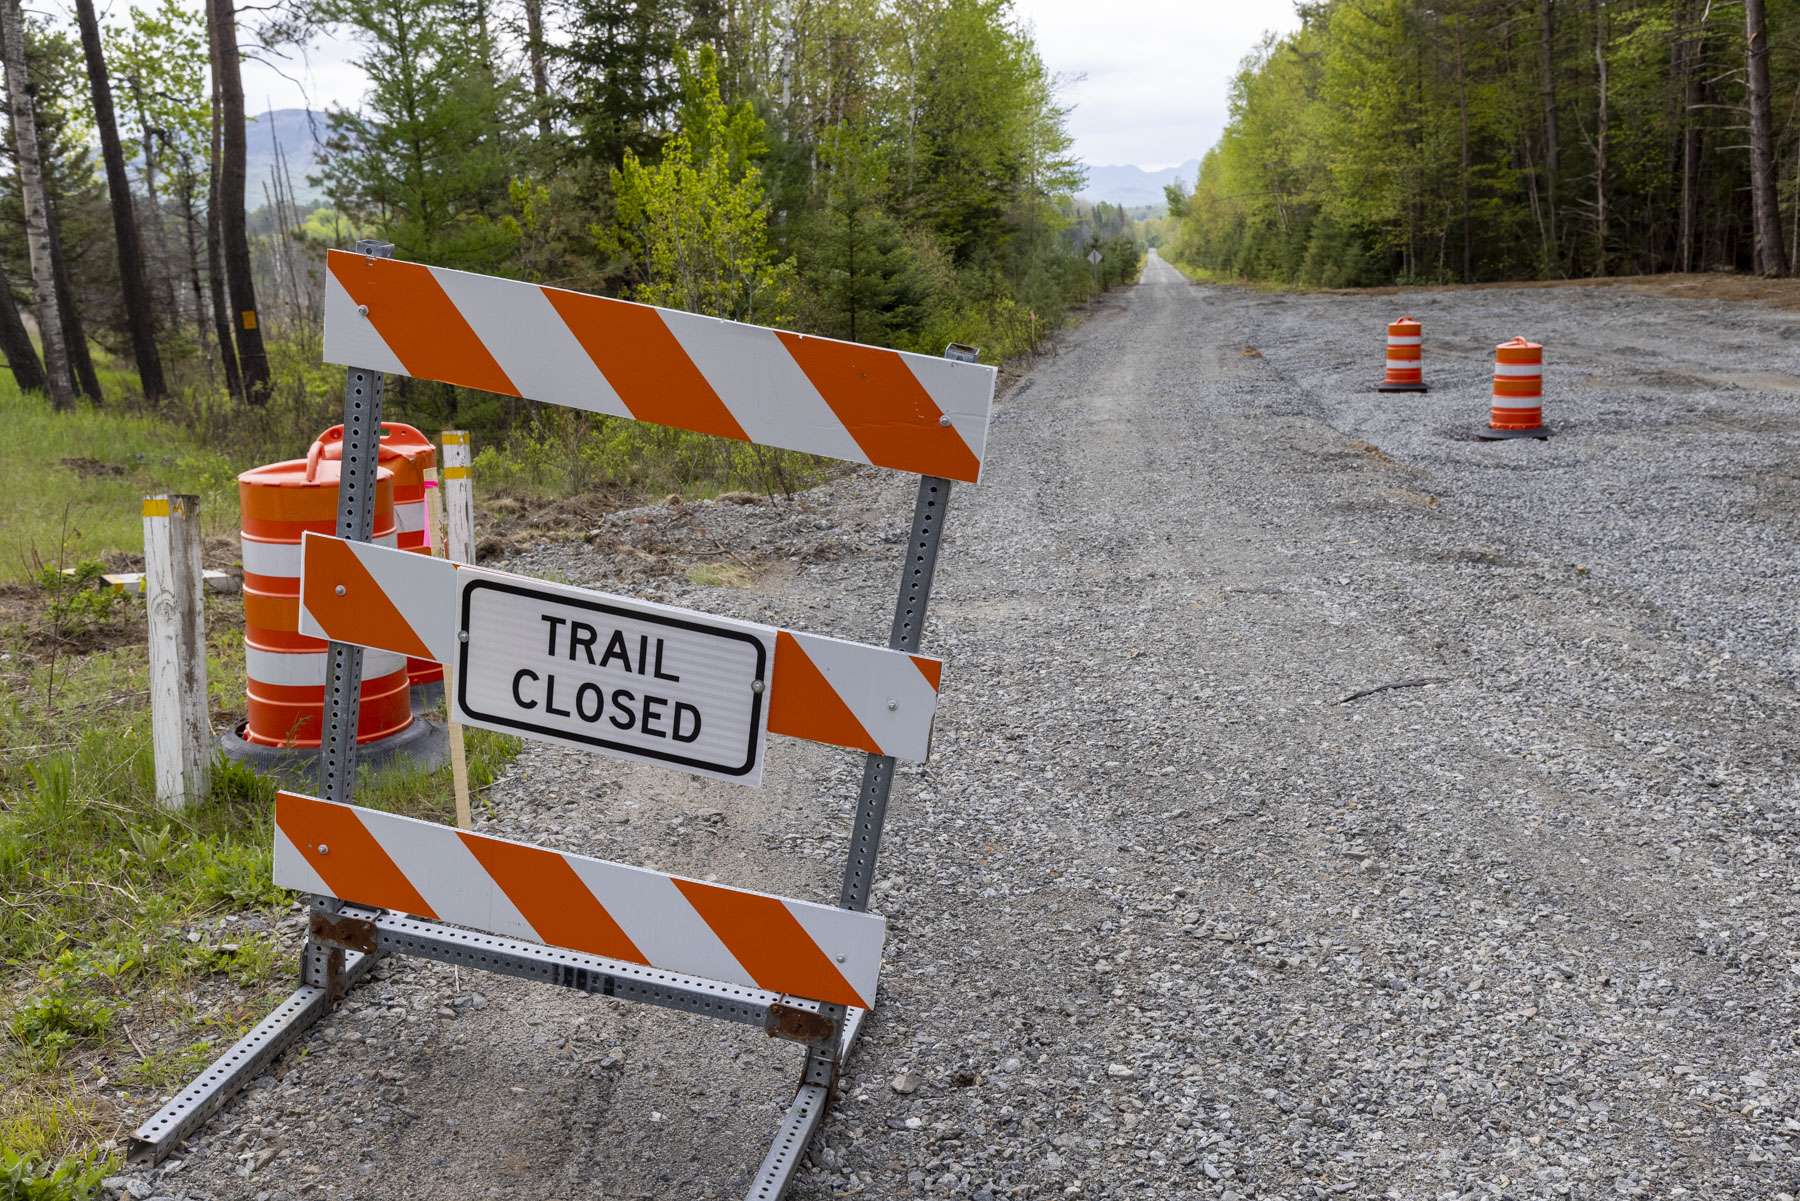 The state is asking recreational users to refrain from using the trail until construction is complete. Photo by Mike Lynch